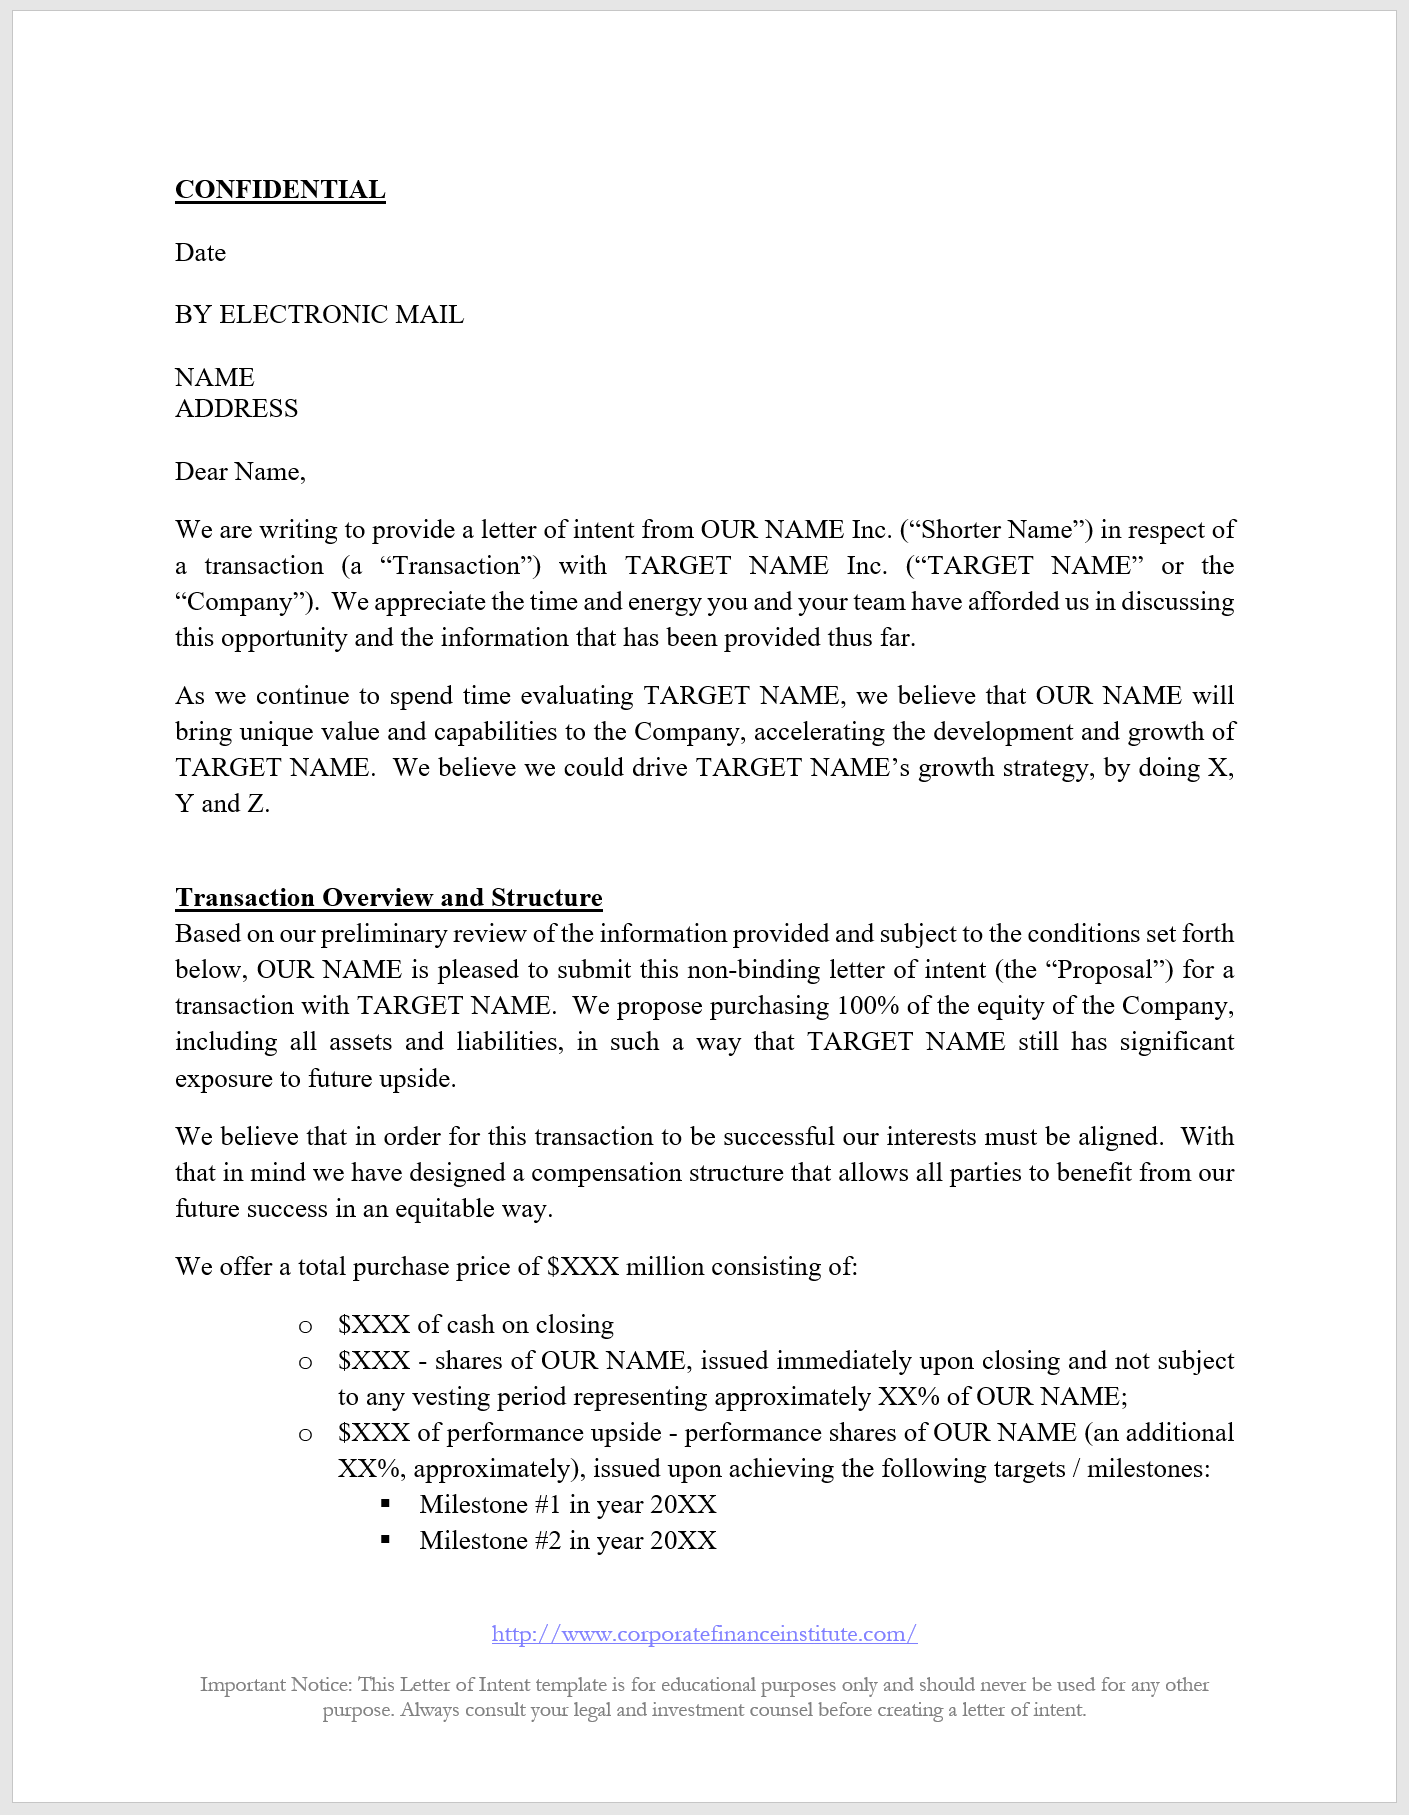 Sample Proposal Letter For Consulting Services from corporatefinanceinstitute.com